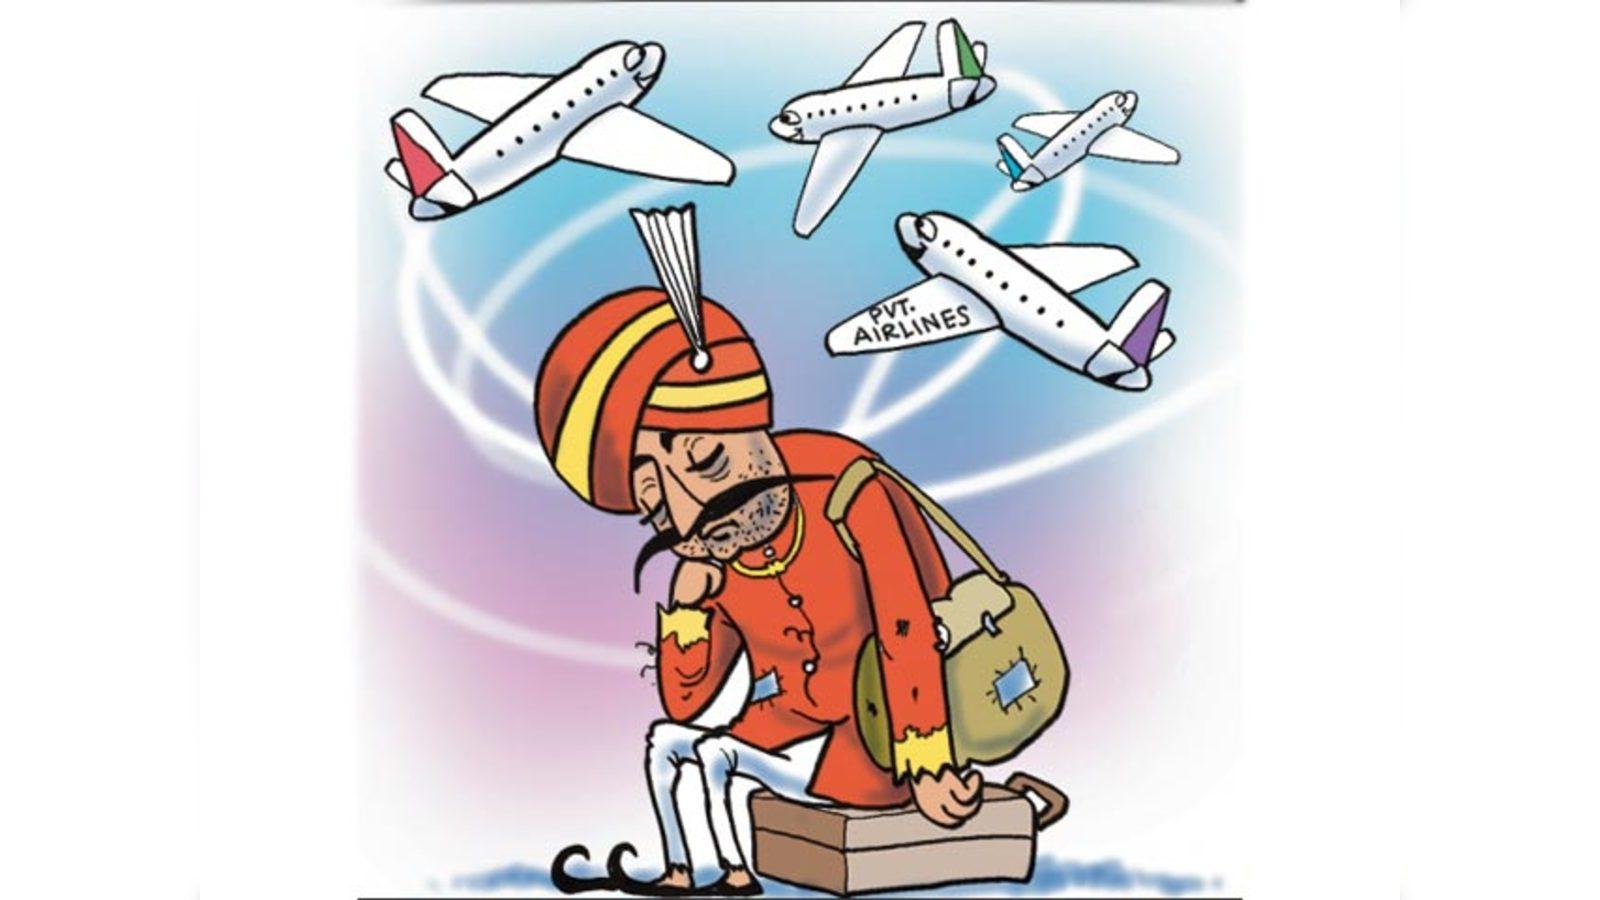 air india logo: Tata Group's Air India unveils new logo of 'limitless  possibilities'; Maharaja retires - The Economic Times Video | ET Now